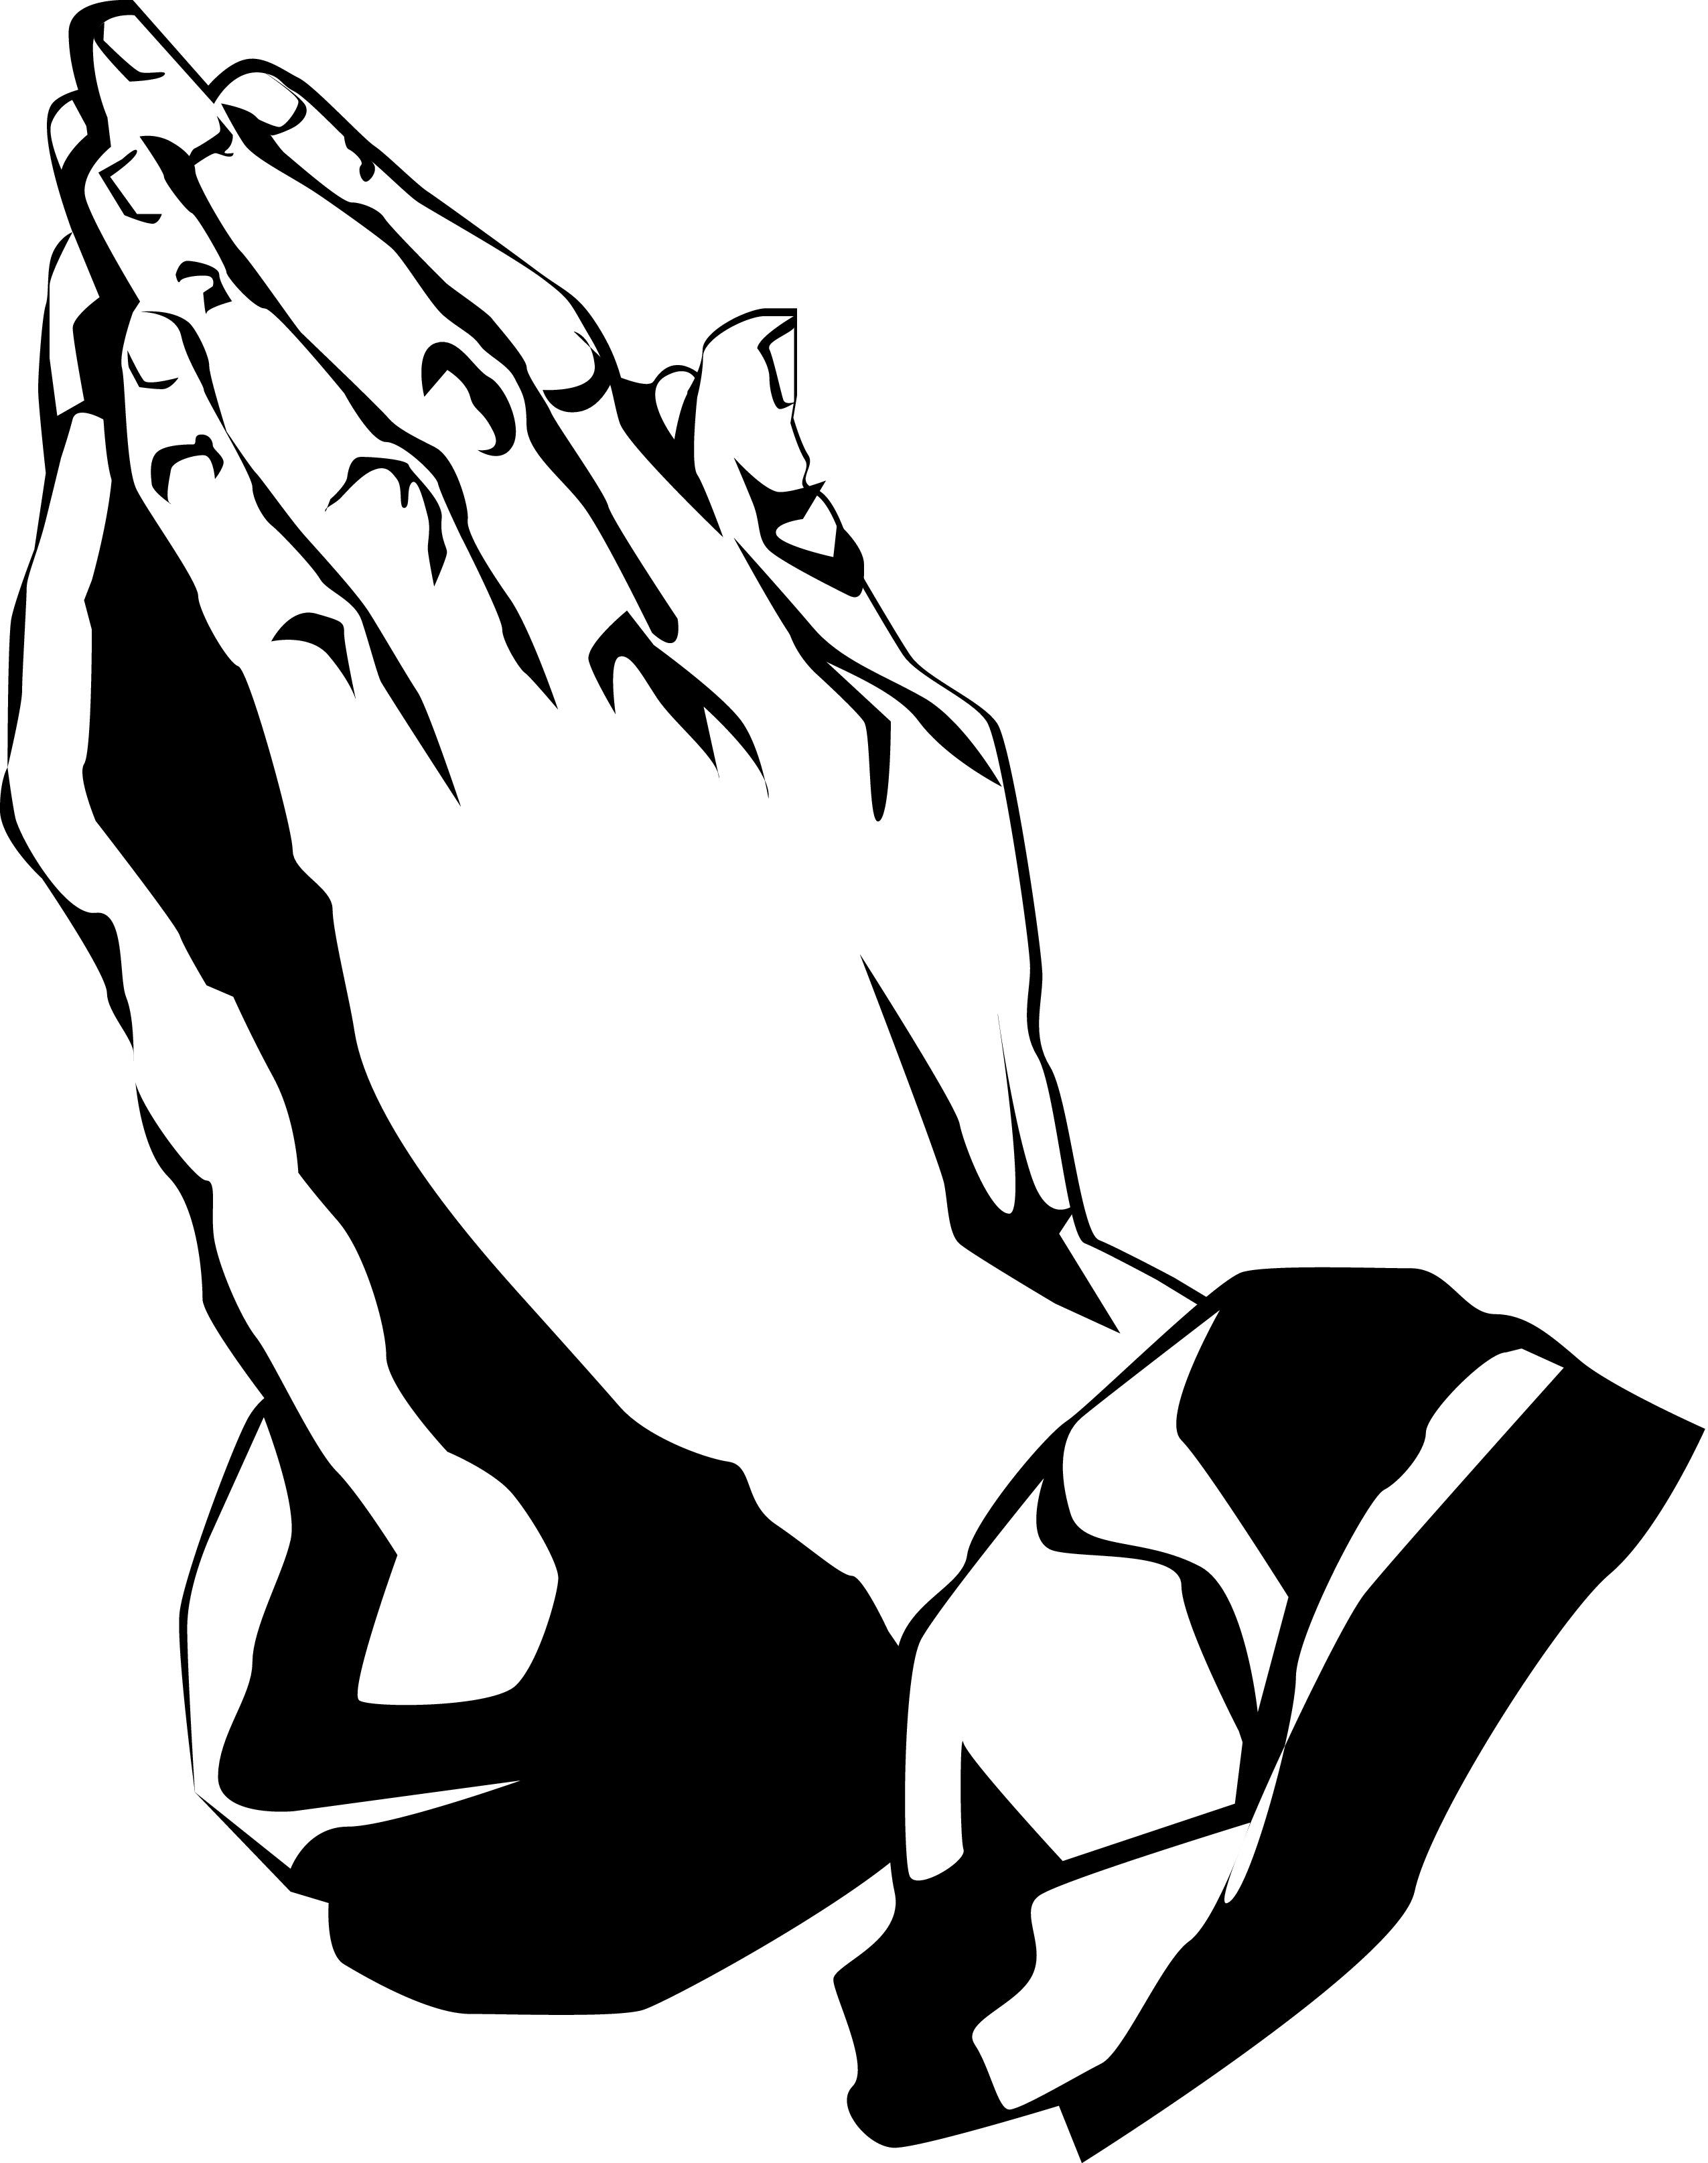 Group prayer clipart free clipart images